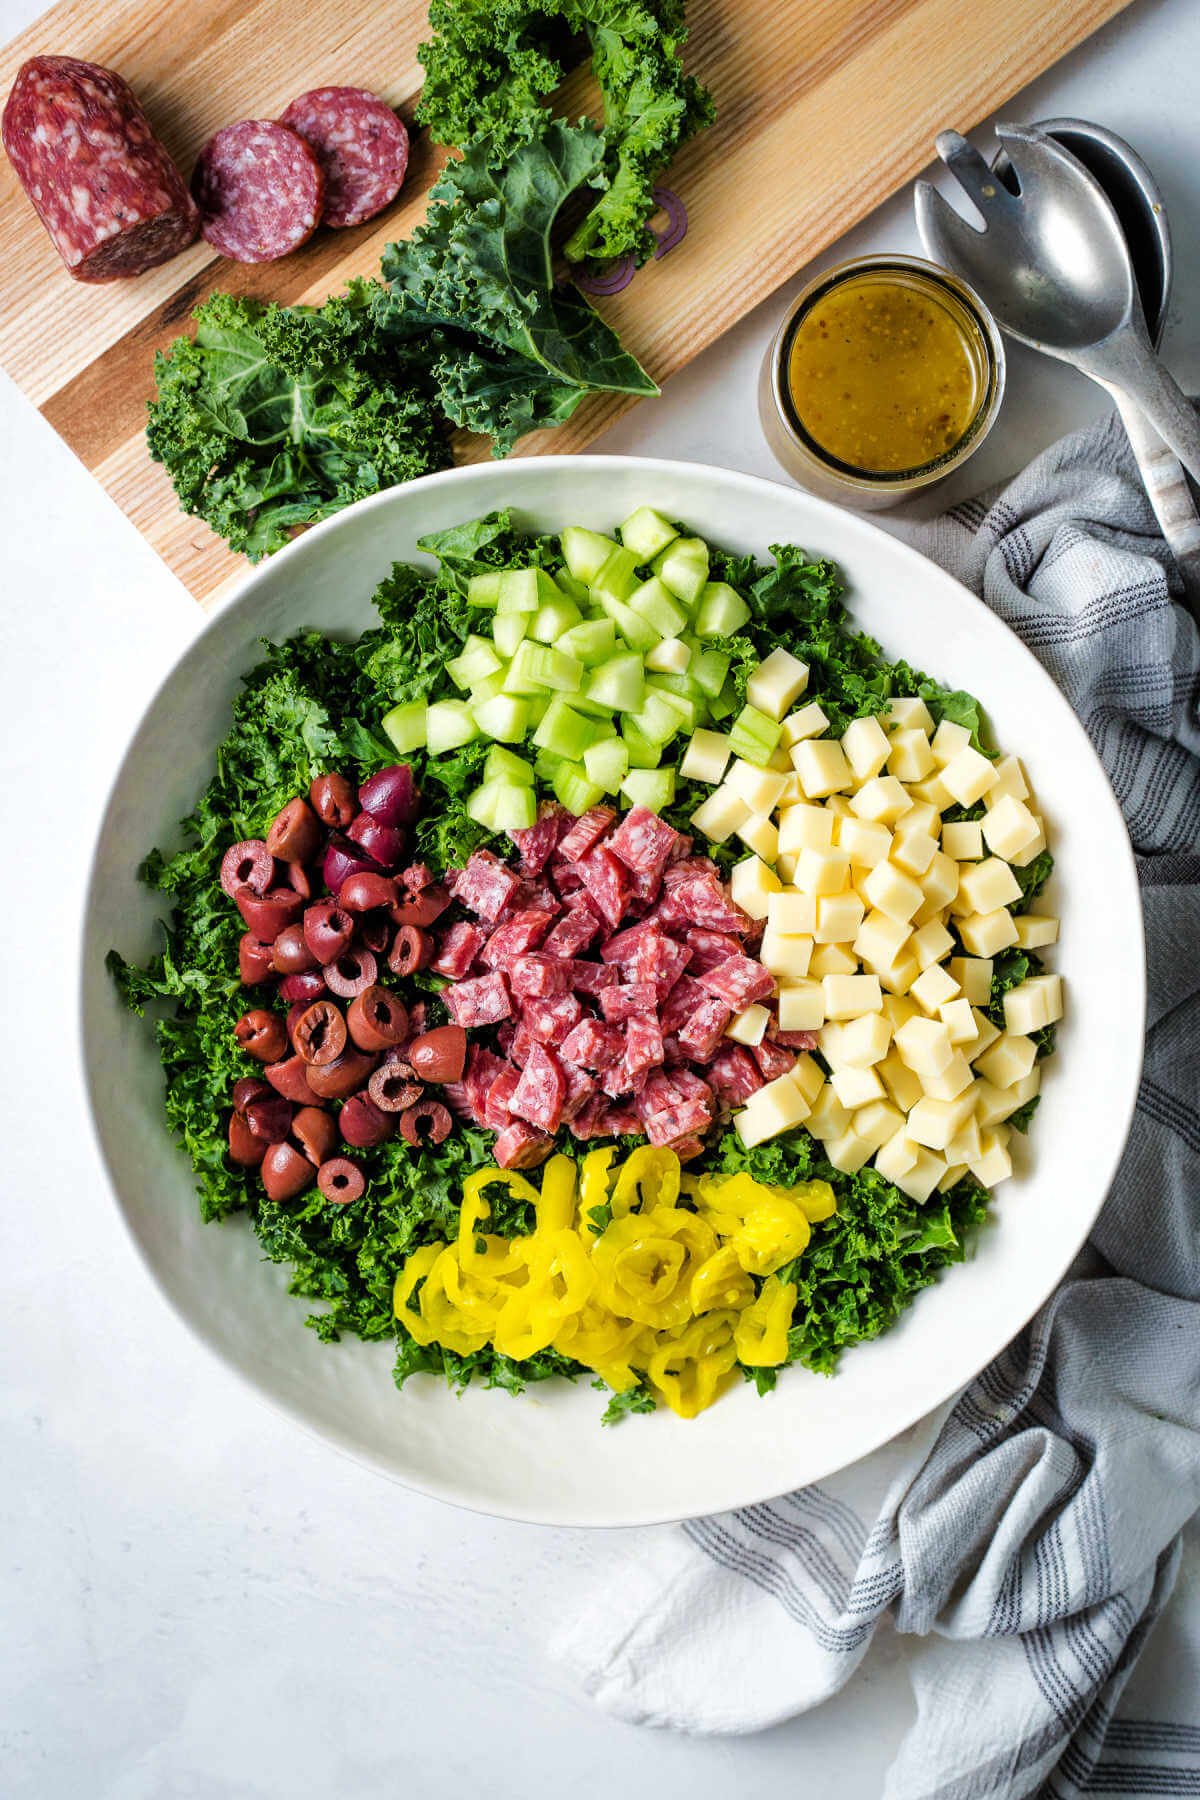 chopped ingredients in a bowl and vinaigrette in a bottle for chopped kale salad on a table with a cutting board with salami and kale leaves.